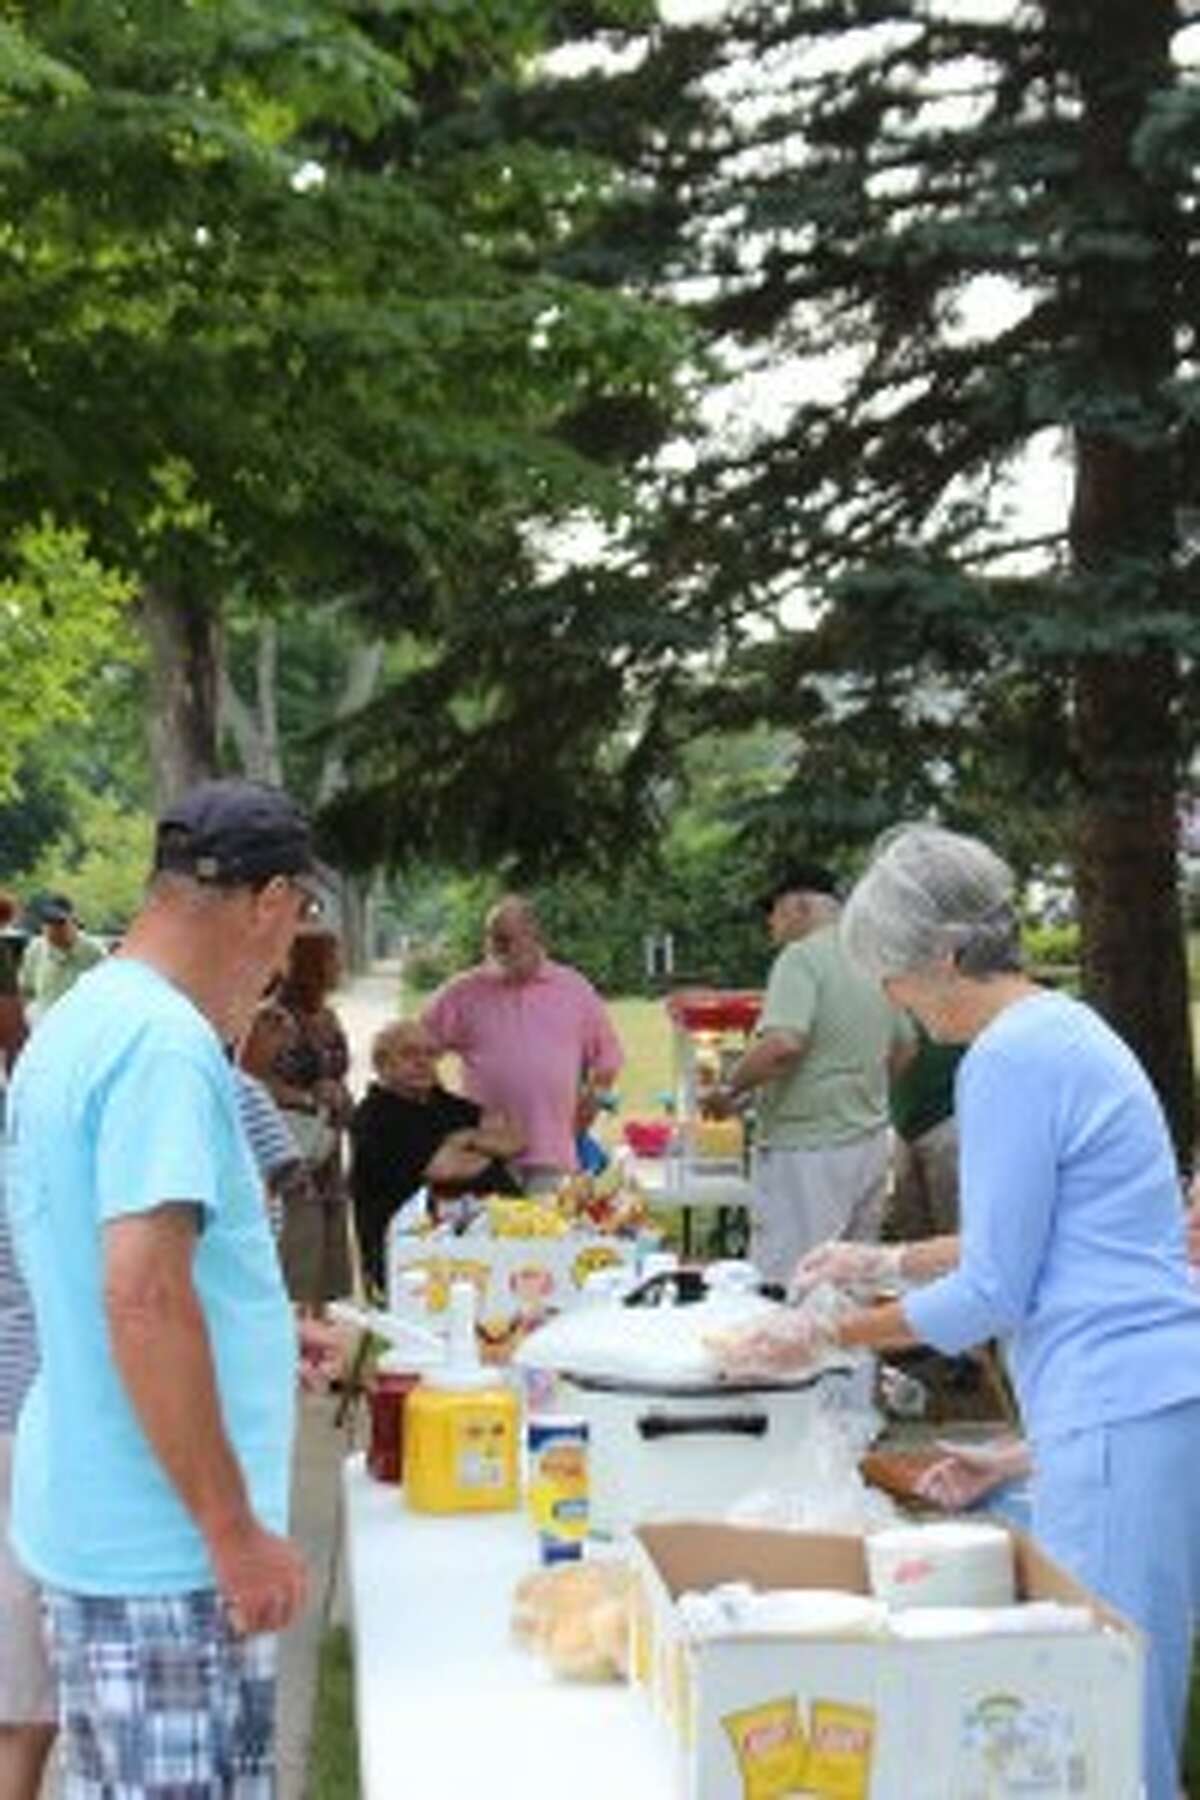 FEED THE SOUL: Hungry visitors and members of the First Congregational Church of Frankfort congregation line up to get a free picnic dinner during the church's Block Party, held July 22. (Photo/Colin Merry)